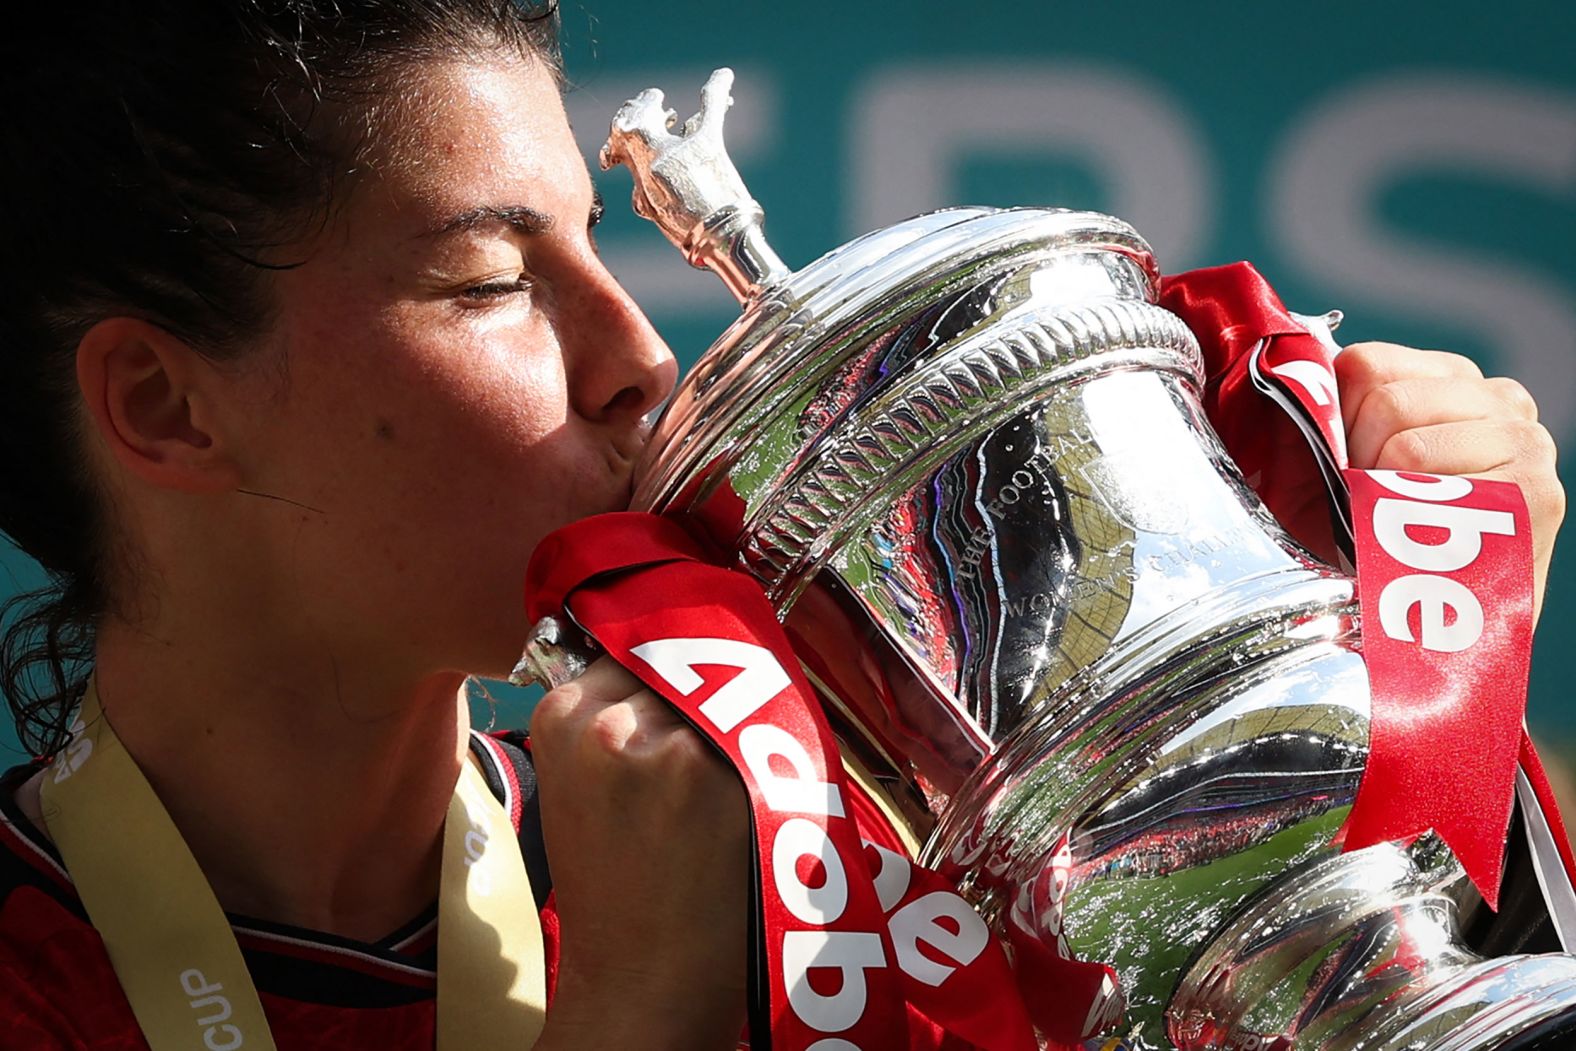 Manchester United forward Lucía García kisses the trophy after her club <a href="index.php?page=&url=https%3A%2F%2Fwww.cnn.com%2F2024%2F05%2F12%2Fsport%2Fmanchester-united-fa-cup-tottenham-hotspur-spt-intl%2Findex.html" target="_blank">won the Women's FA Cup for the first time in its history</a> on Sunday, May 12. United defeated Tottenham Hotspur 4-0 at London's Wembley Stadium.